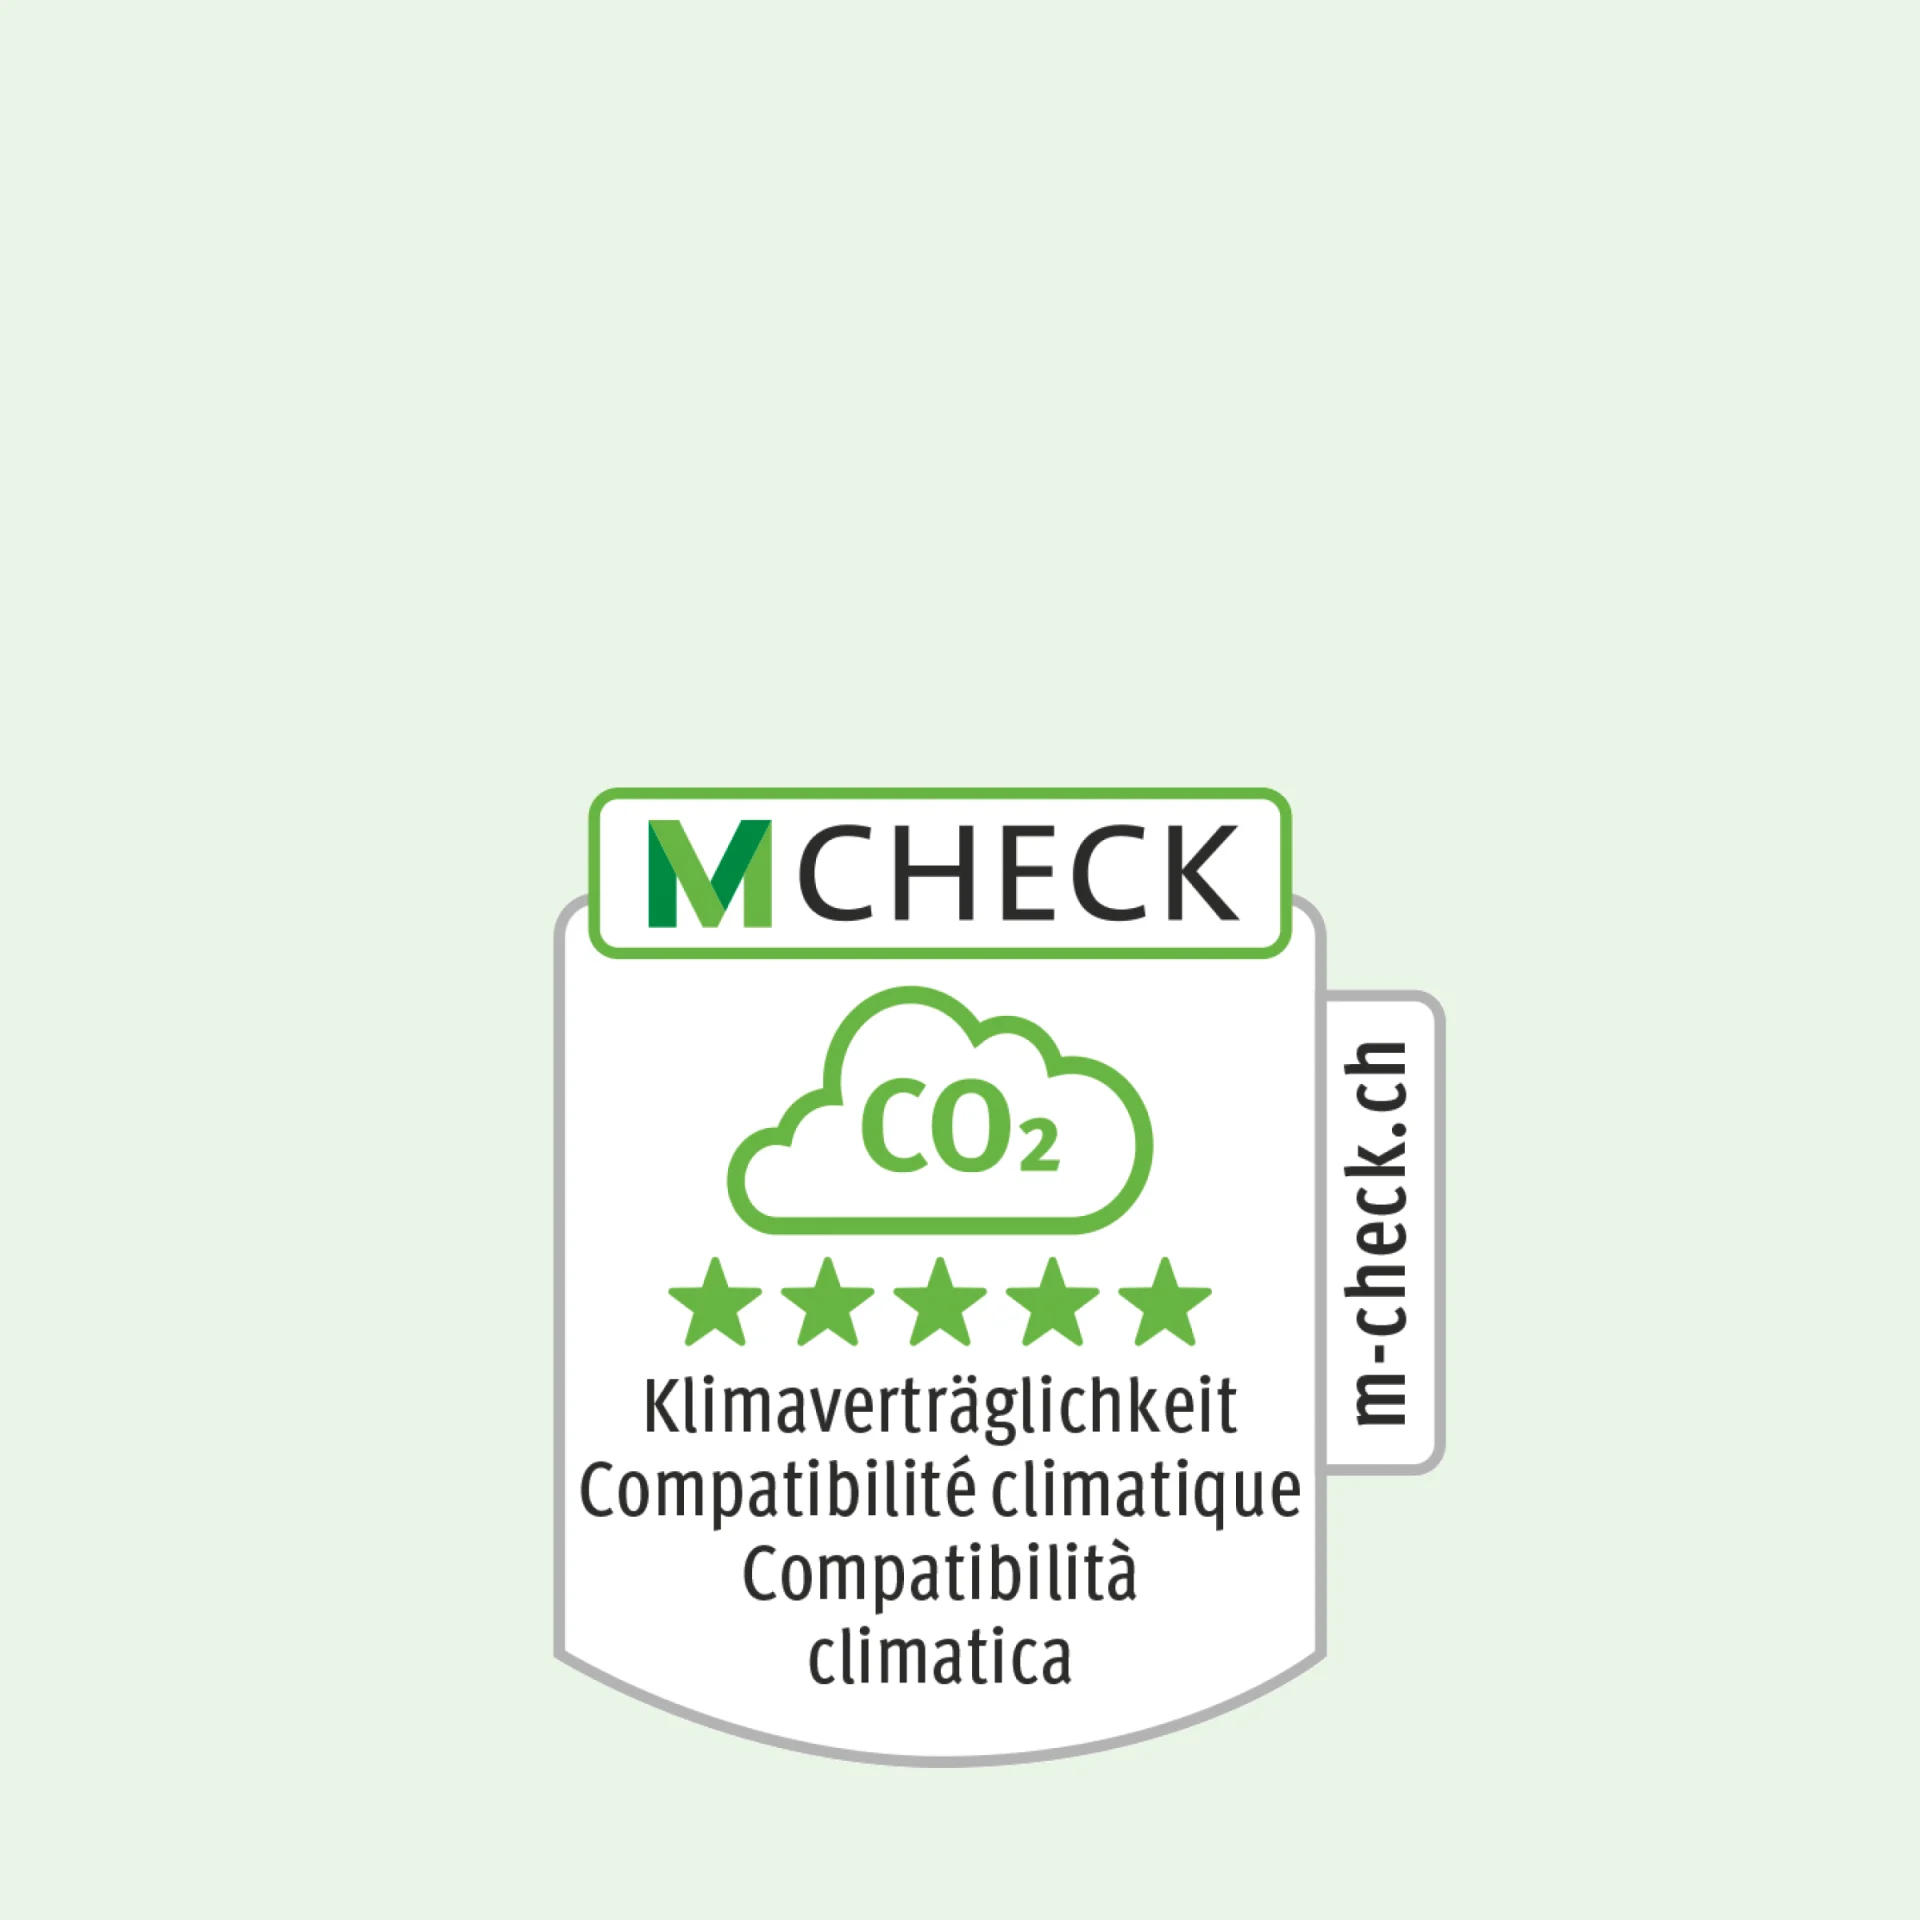 M-Check icon with a cloud of CO2, including five stars for climate compatibility.